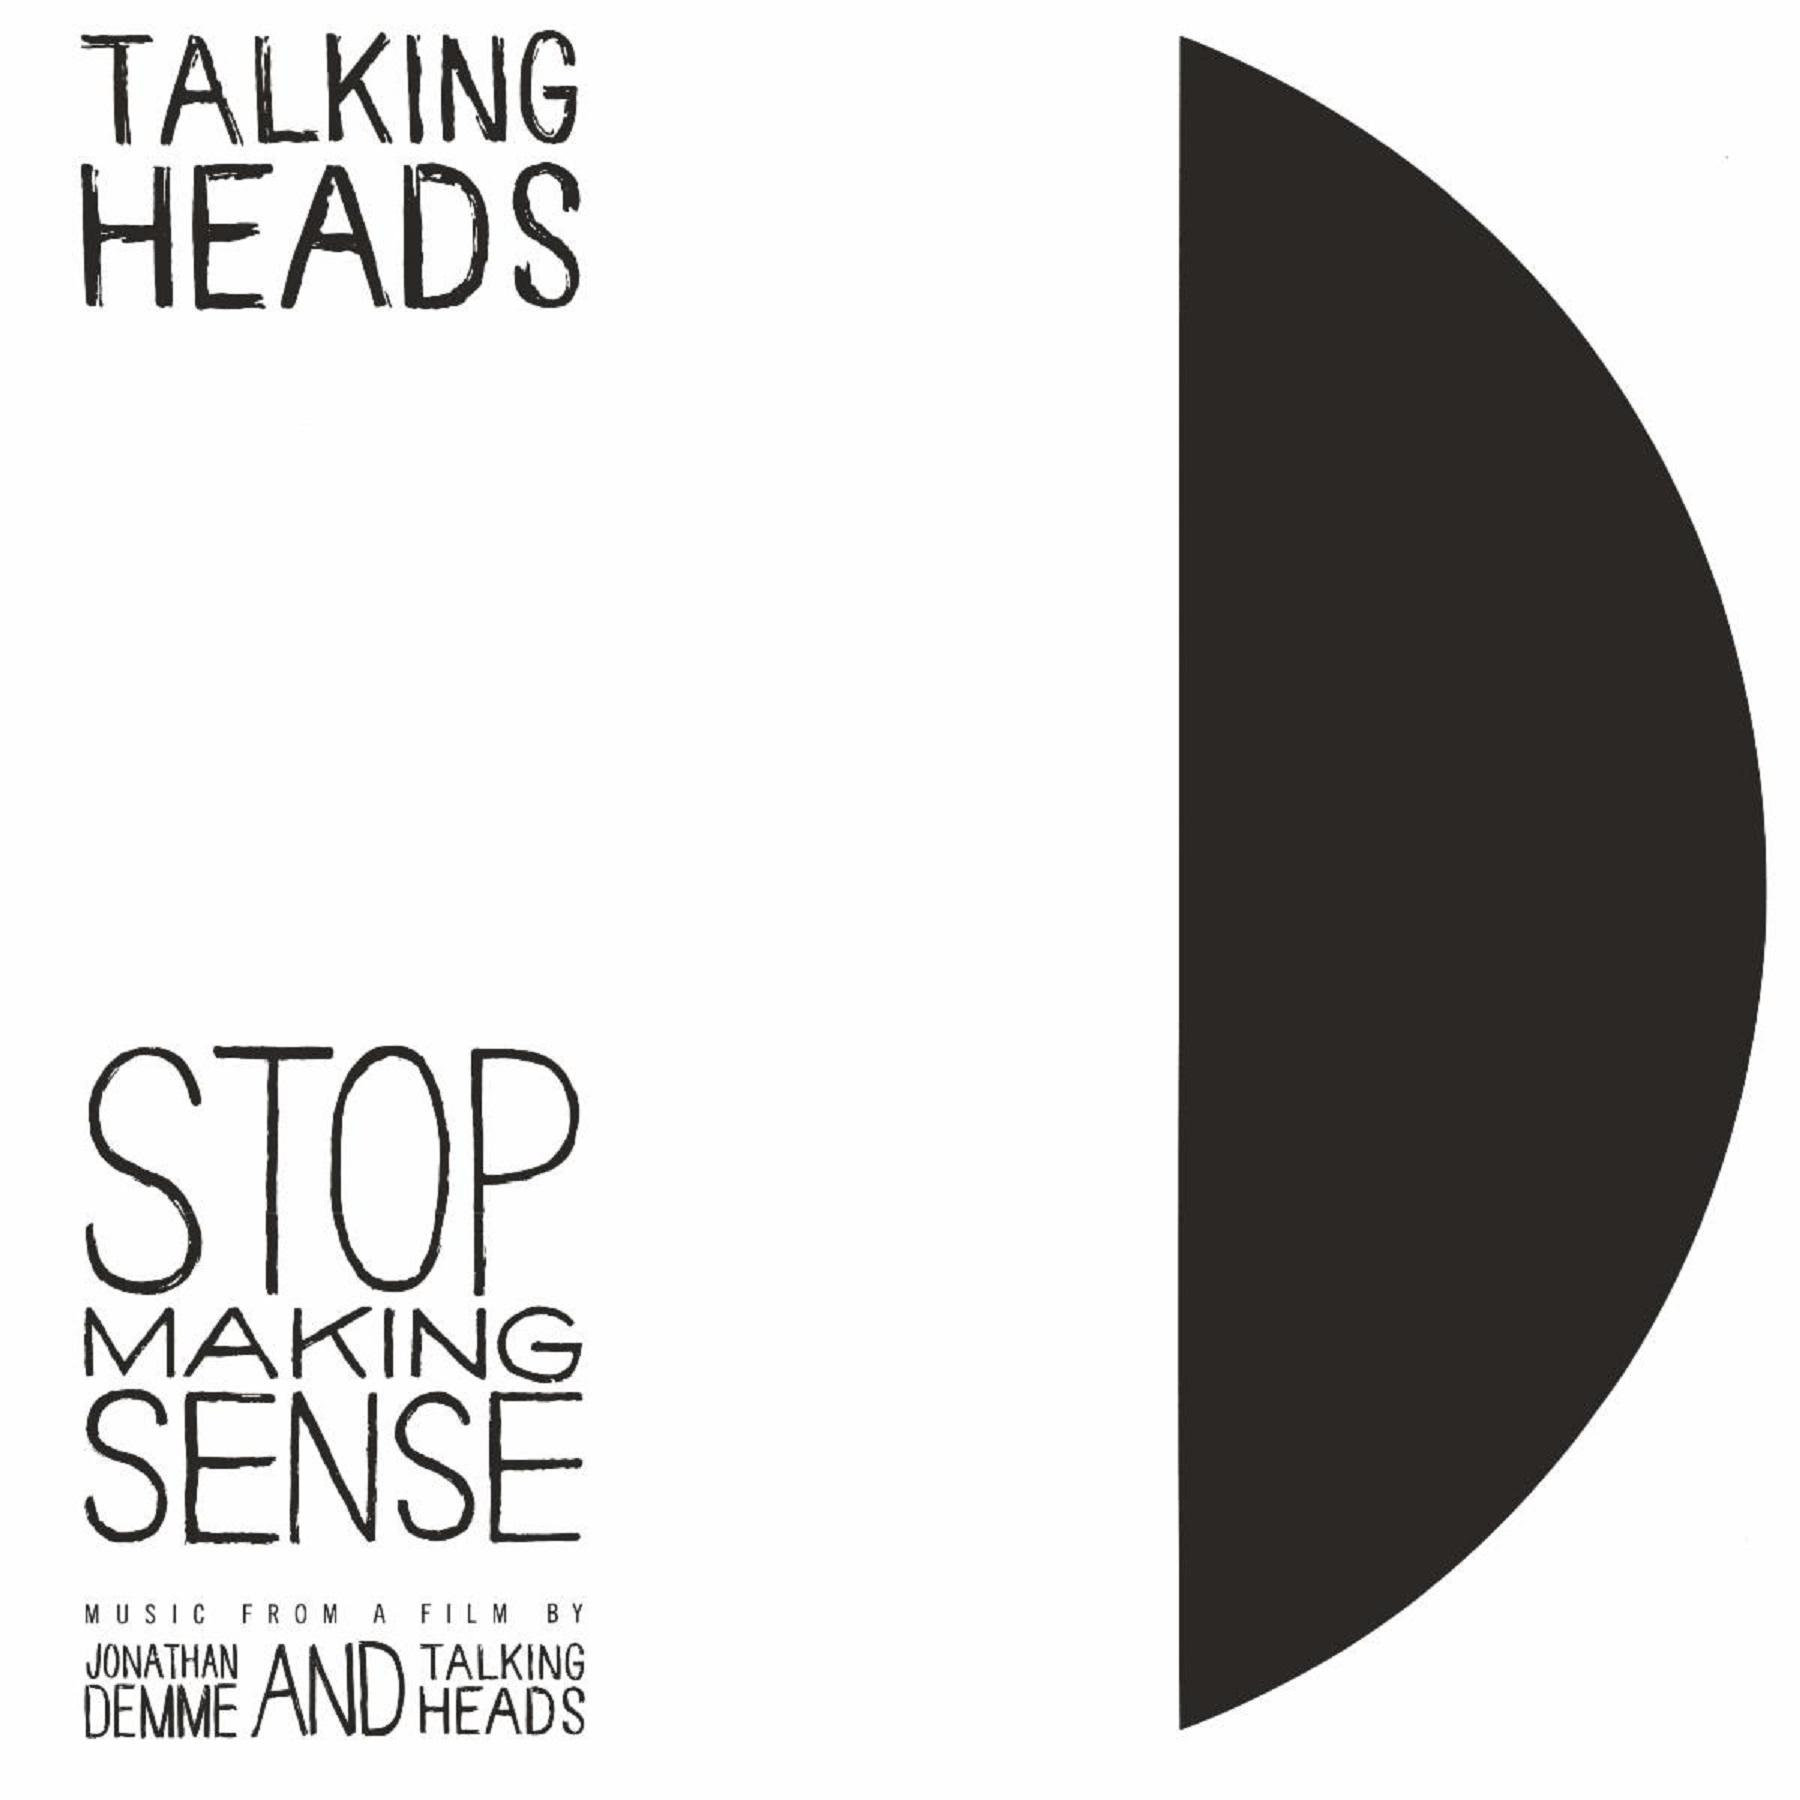 Stop Making Sense: Talking Heads to Release Deluxe Edition Of Legendary Concert Film Soundtrack